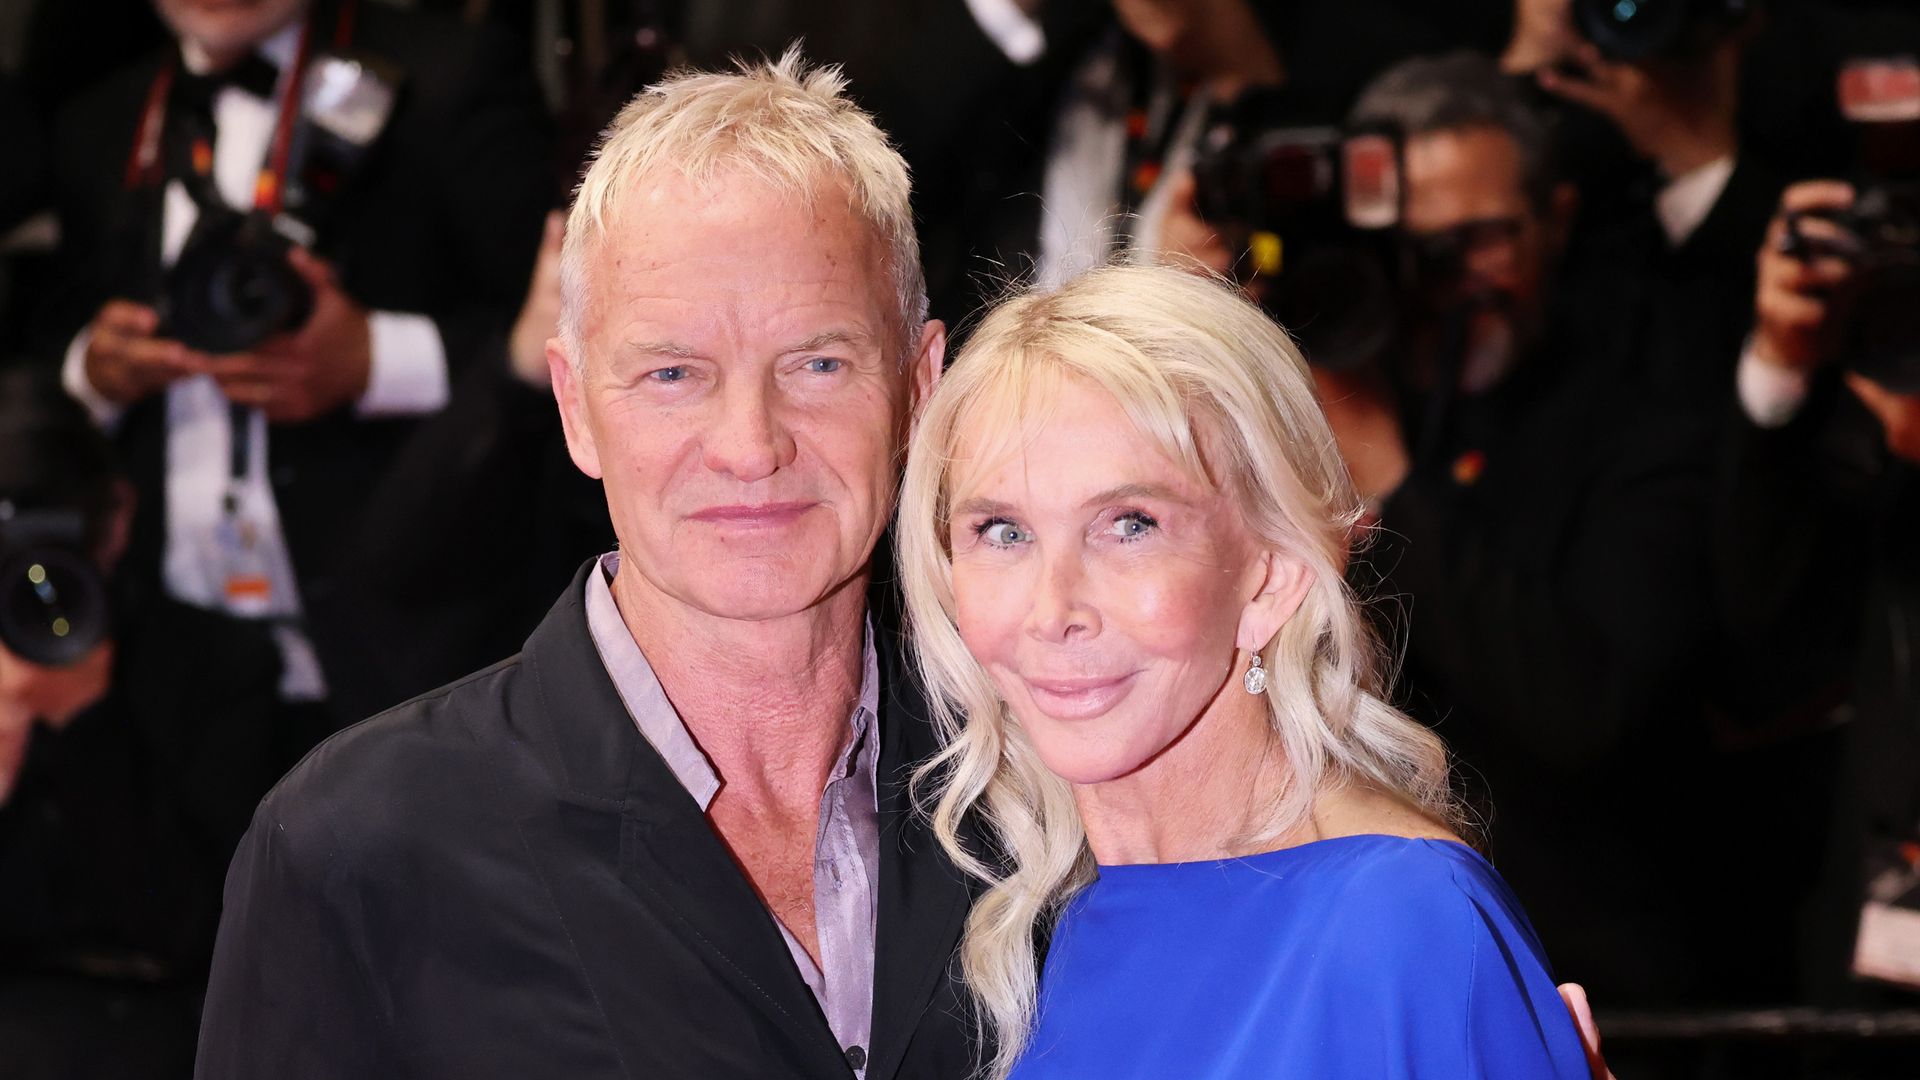 Sting and gorgeous wife Trudie Styler look besotted during affectionate display on Cannes red carpet